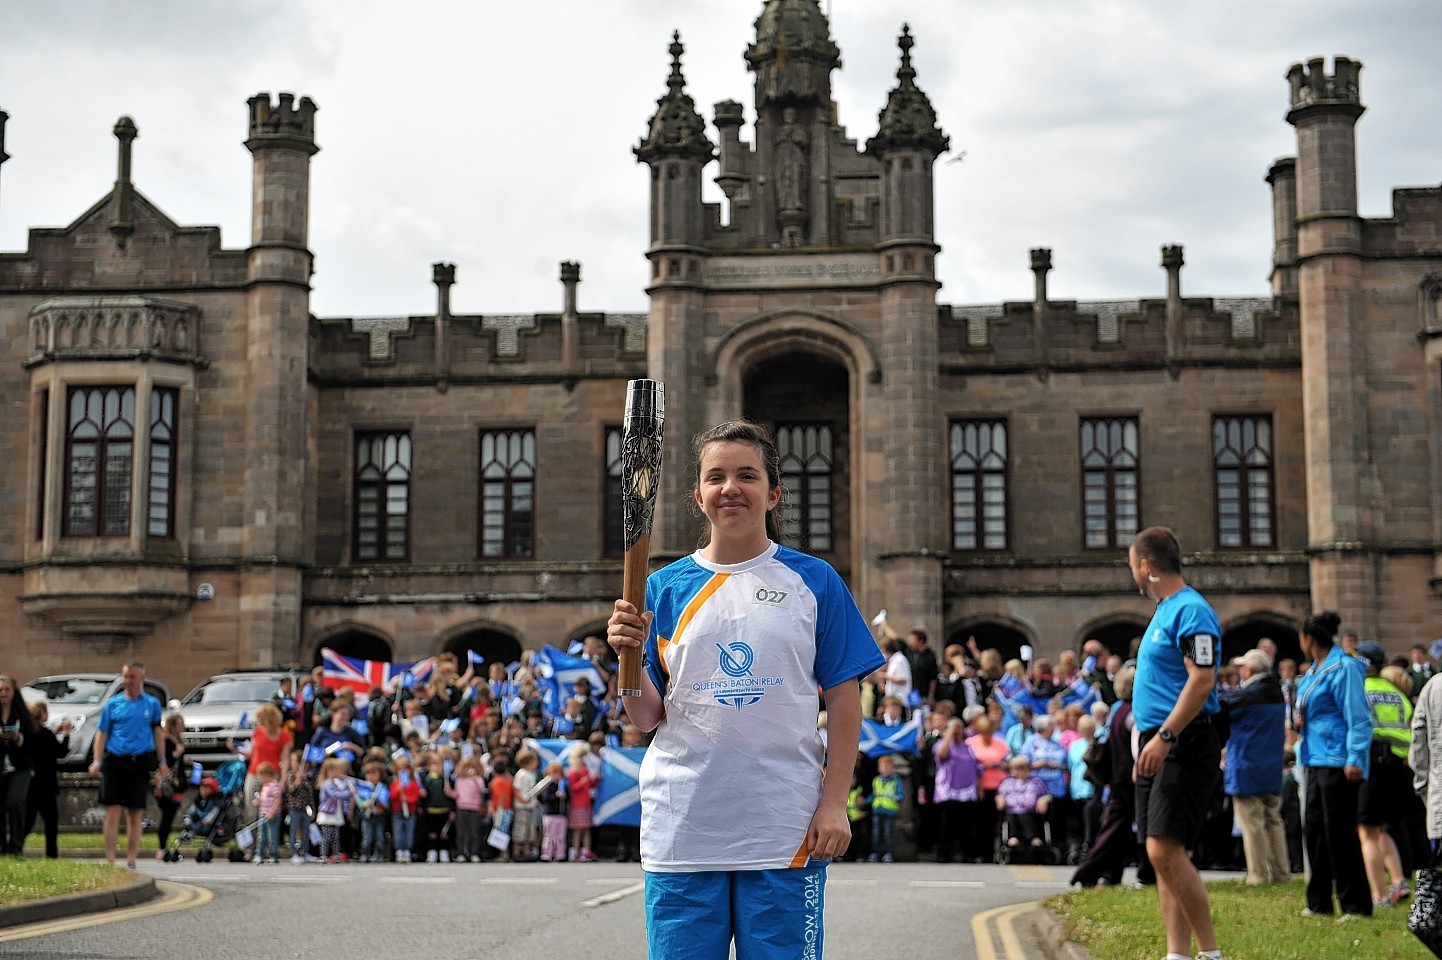 The Queen's Baton made its way through Moray last week